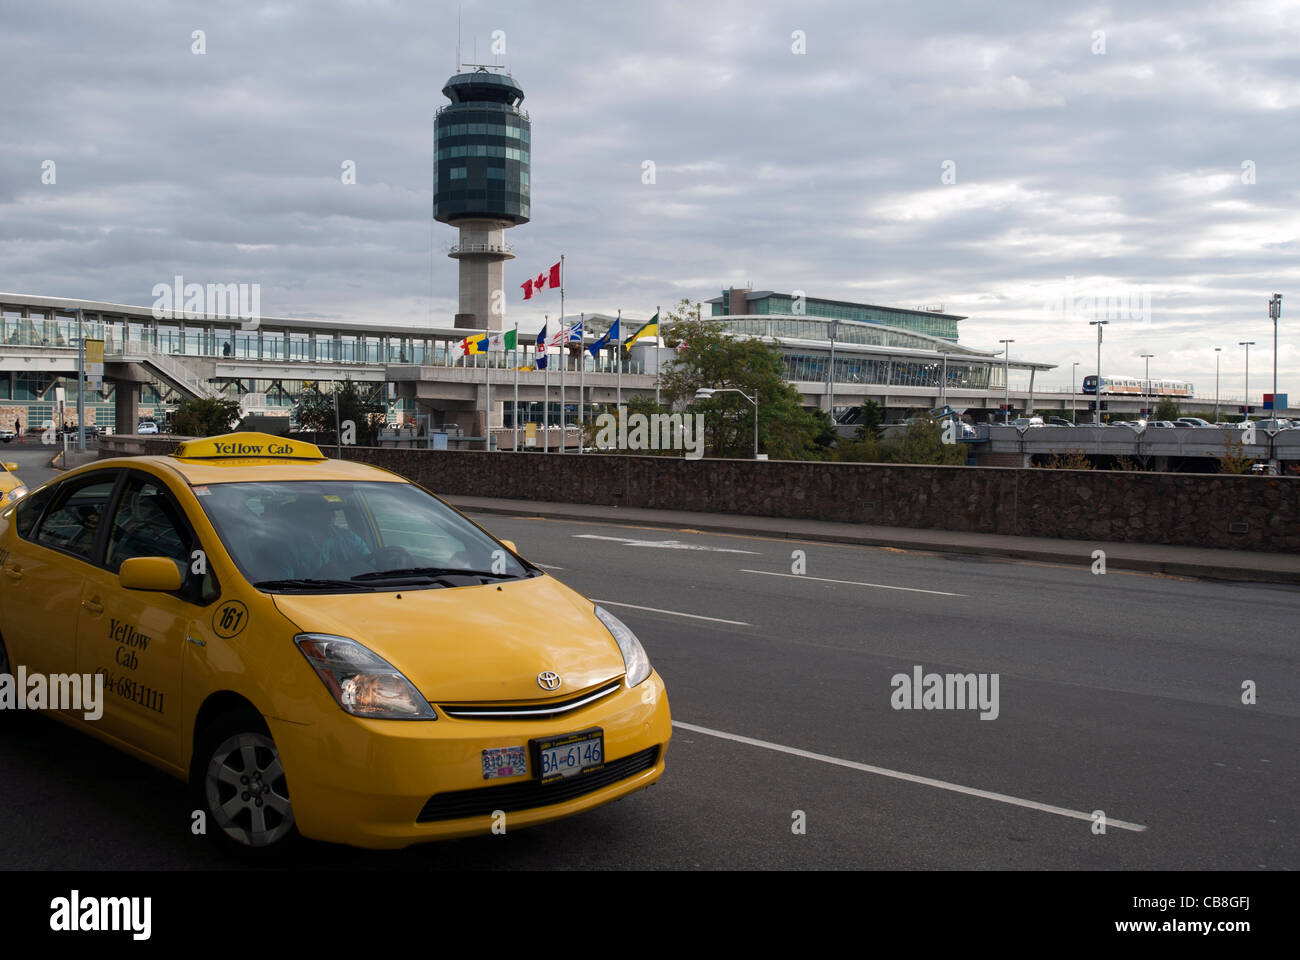 Yellow taxi cab outside Vancouver International Airport, British Columbia, Canada Stock Photo